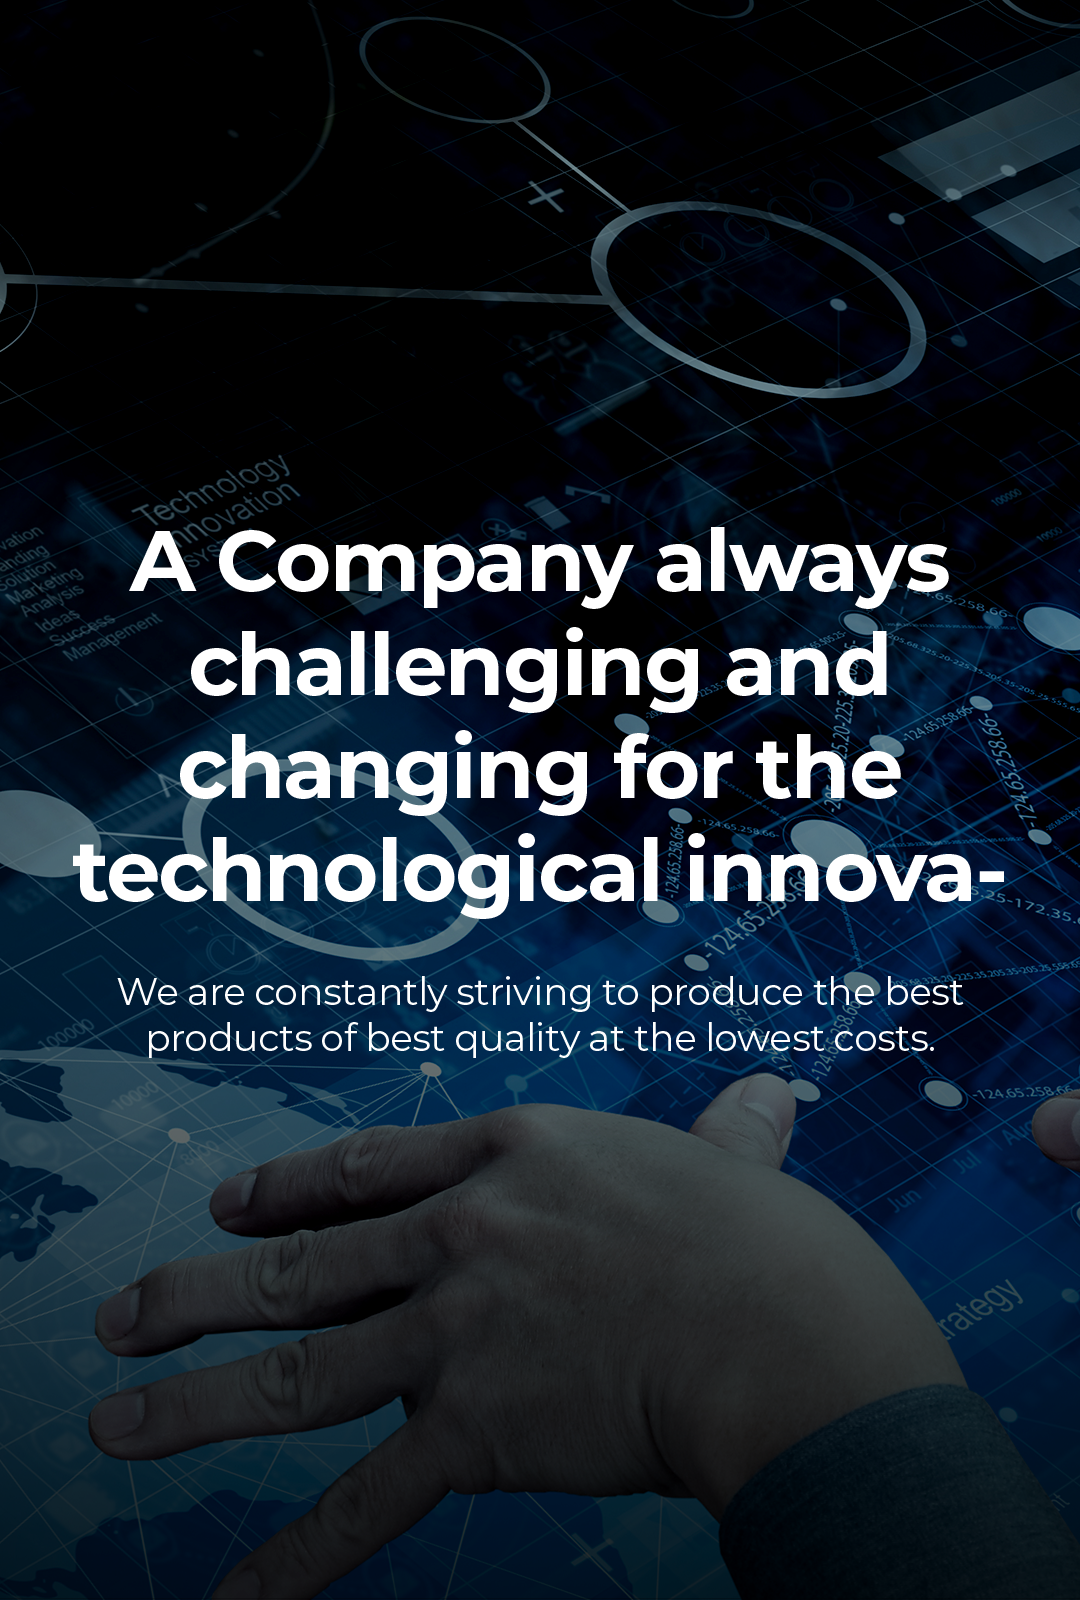 A Company always challenging and changing for the technological innovation